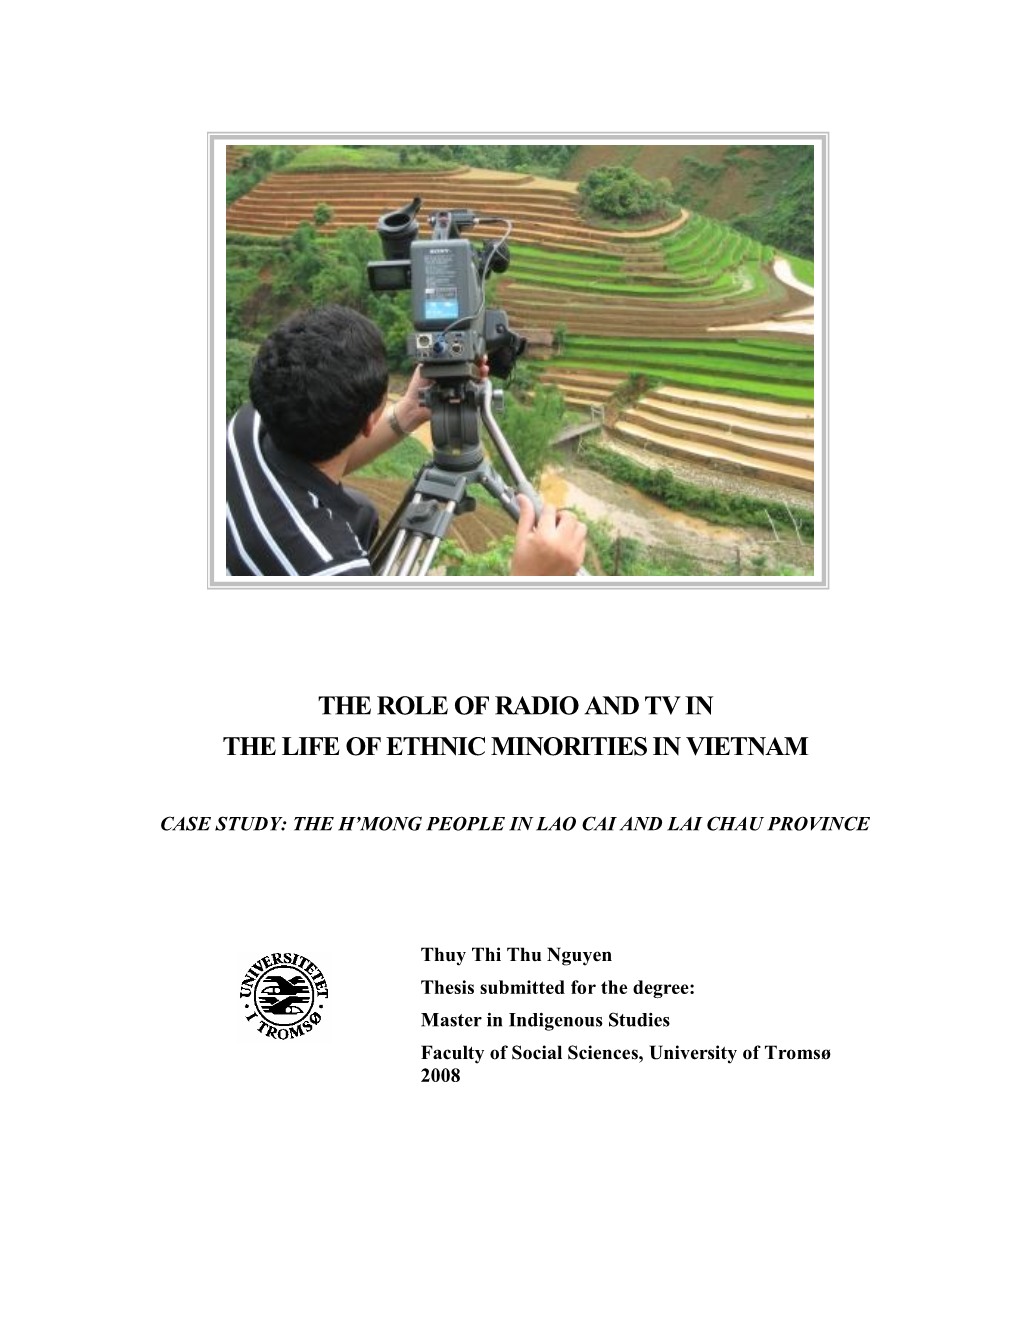 The Role of Radio and Tv in the Life of Ethnic Minorities in Vietnam